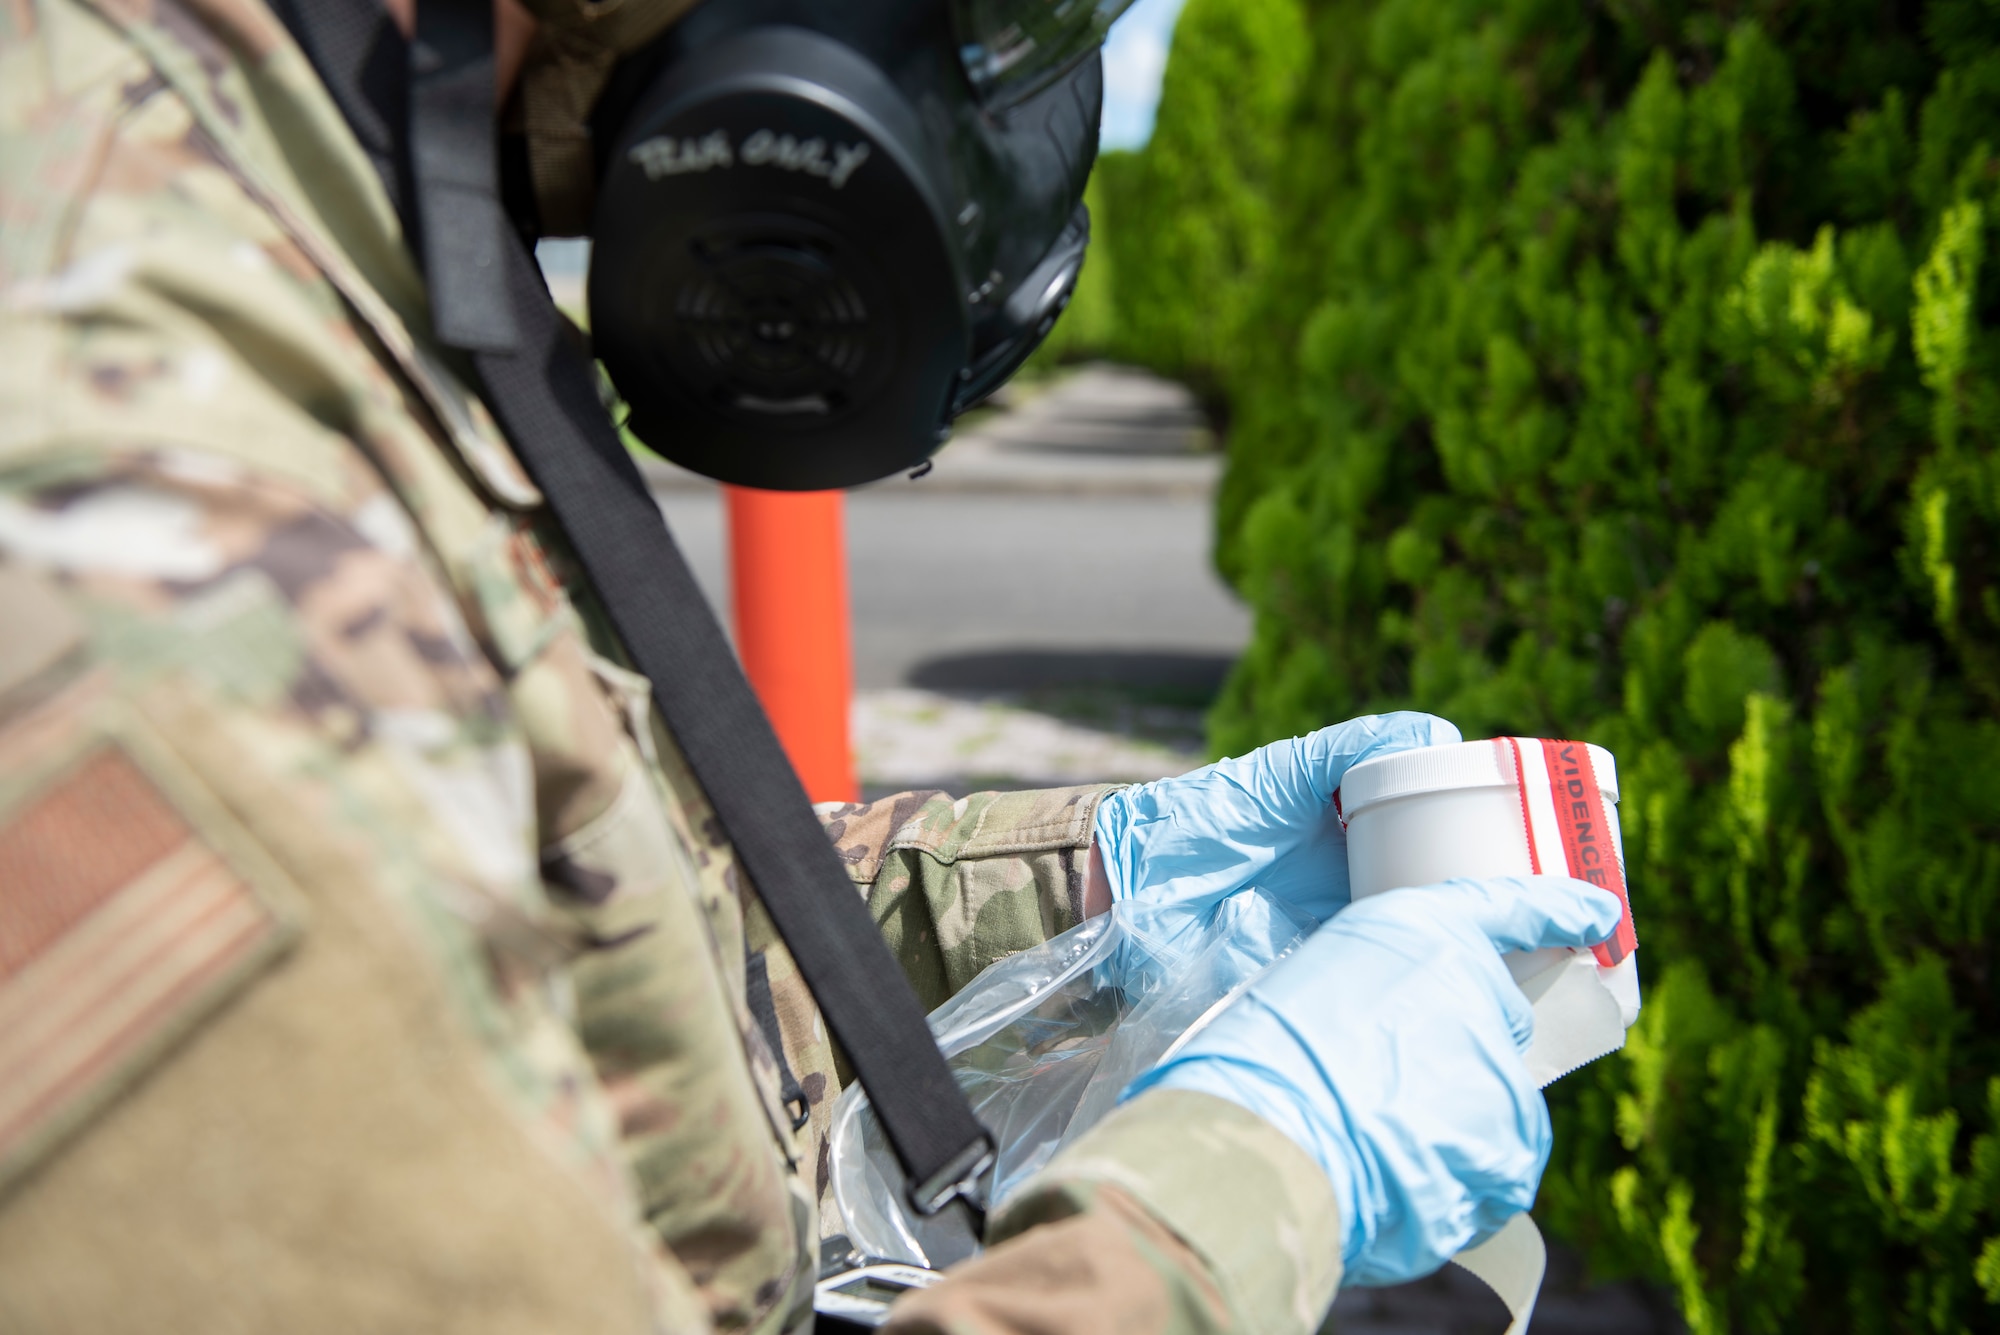 Senior Airman Andrew McClure, 188th Civil Engineer Squadron emergency management specialist, seals a soil sample container during a chemical, biological, radioactive and nuclear site survey training at the Sagami General Depot, Japan. The 188th CES from Ebbing Air National Guard Base, Arkansas, and 138th Civil Engineer Squadron from Tulsa Air National Guard Base, Oklahoma, visited Yokota Air Base, Japan, for a three-week training mission to train on specialized equipment unique to the local area. (U.S. Air Force photo by Tech. Sgt. Joshua Edwards)